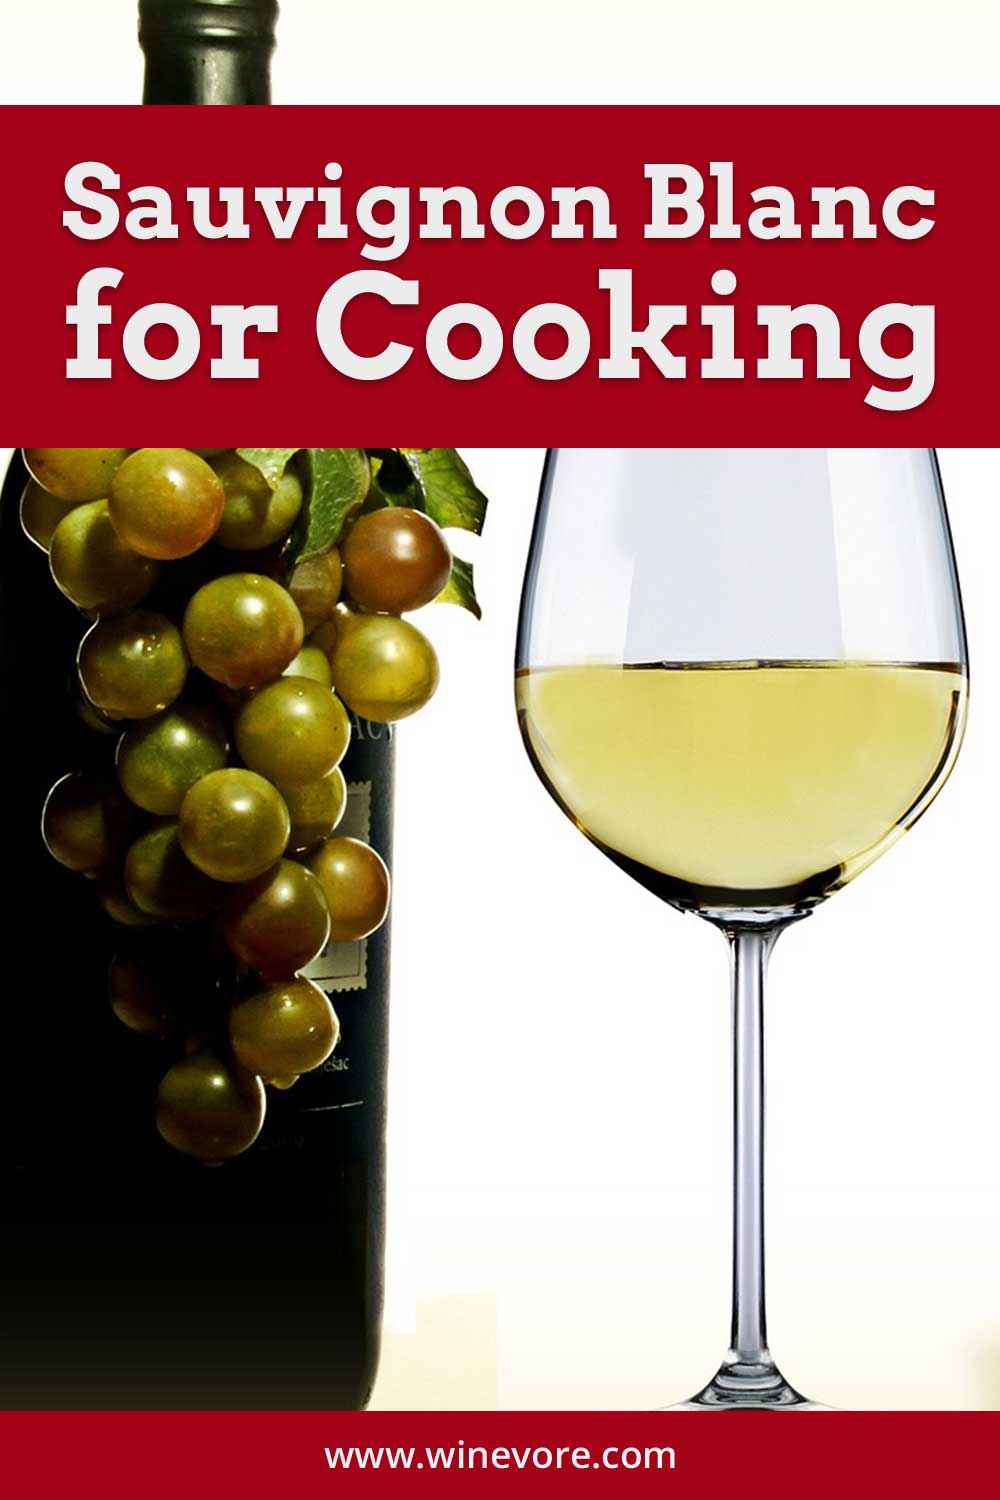 Wine glass and bottle in front of white surface - Sauvignon Blanc for Cooking.